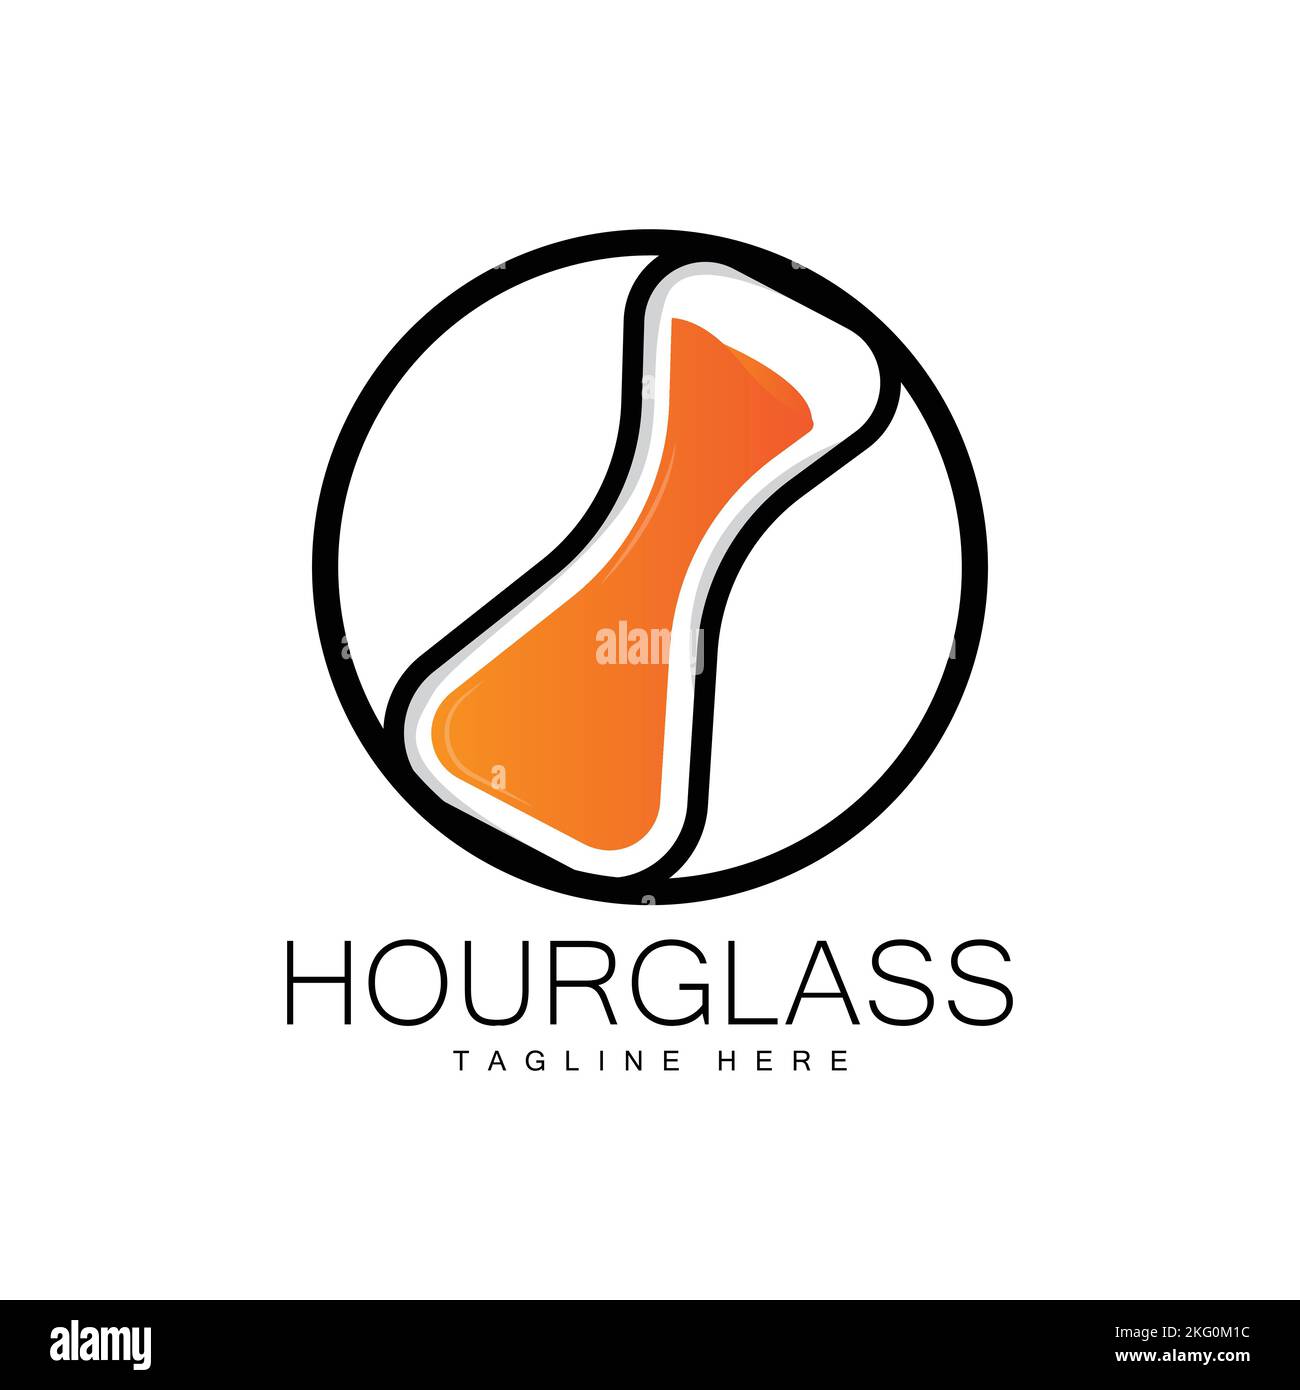 Hourglass Logo, Clock Time Design, Glass And Sand Style, Product Brand Illustration And Template Stock Vector